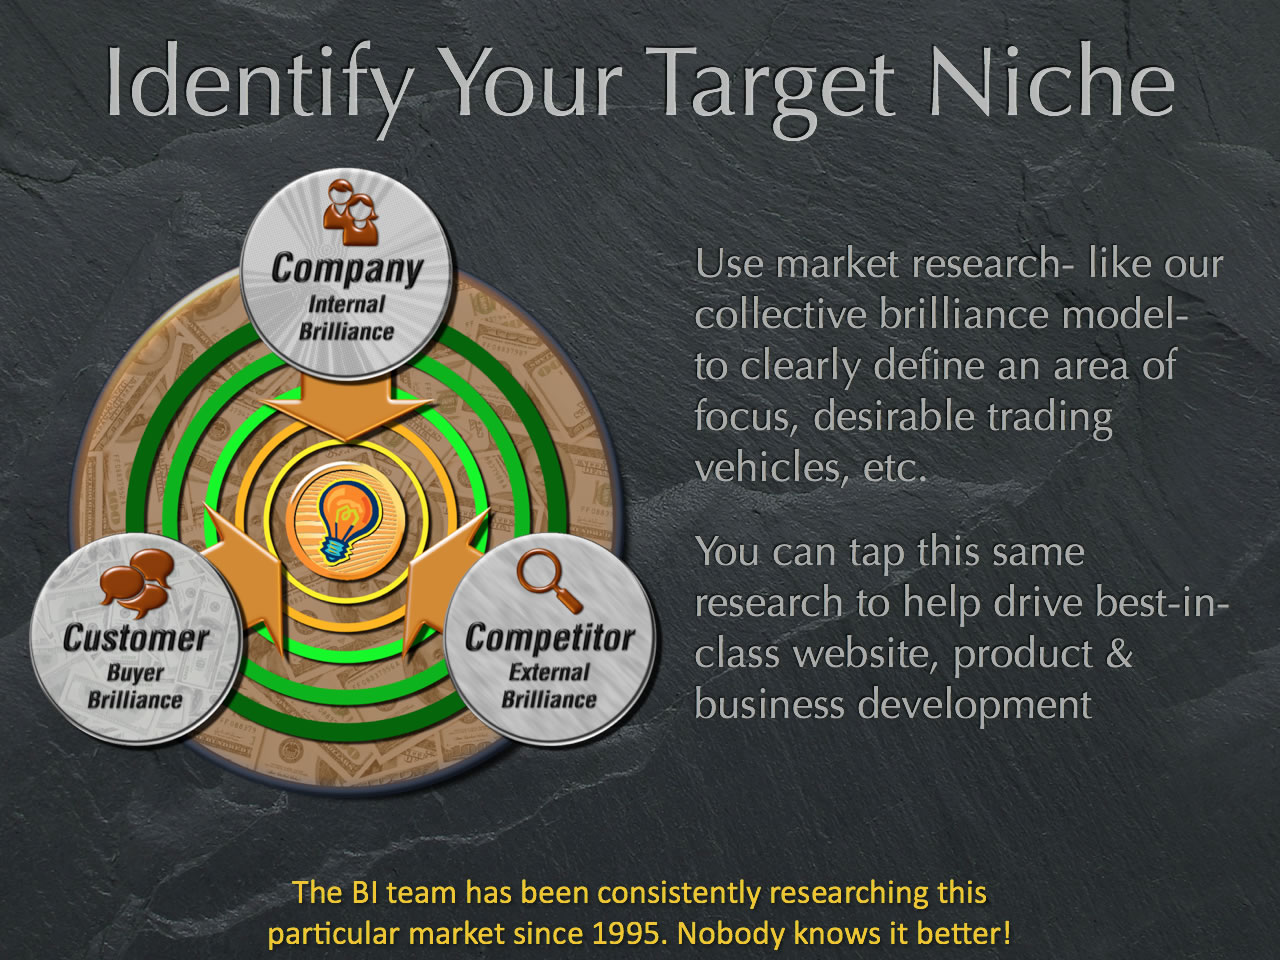 use the best customer and competitive analysis to identify a target niche most likely to subscriber to your product